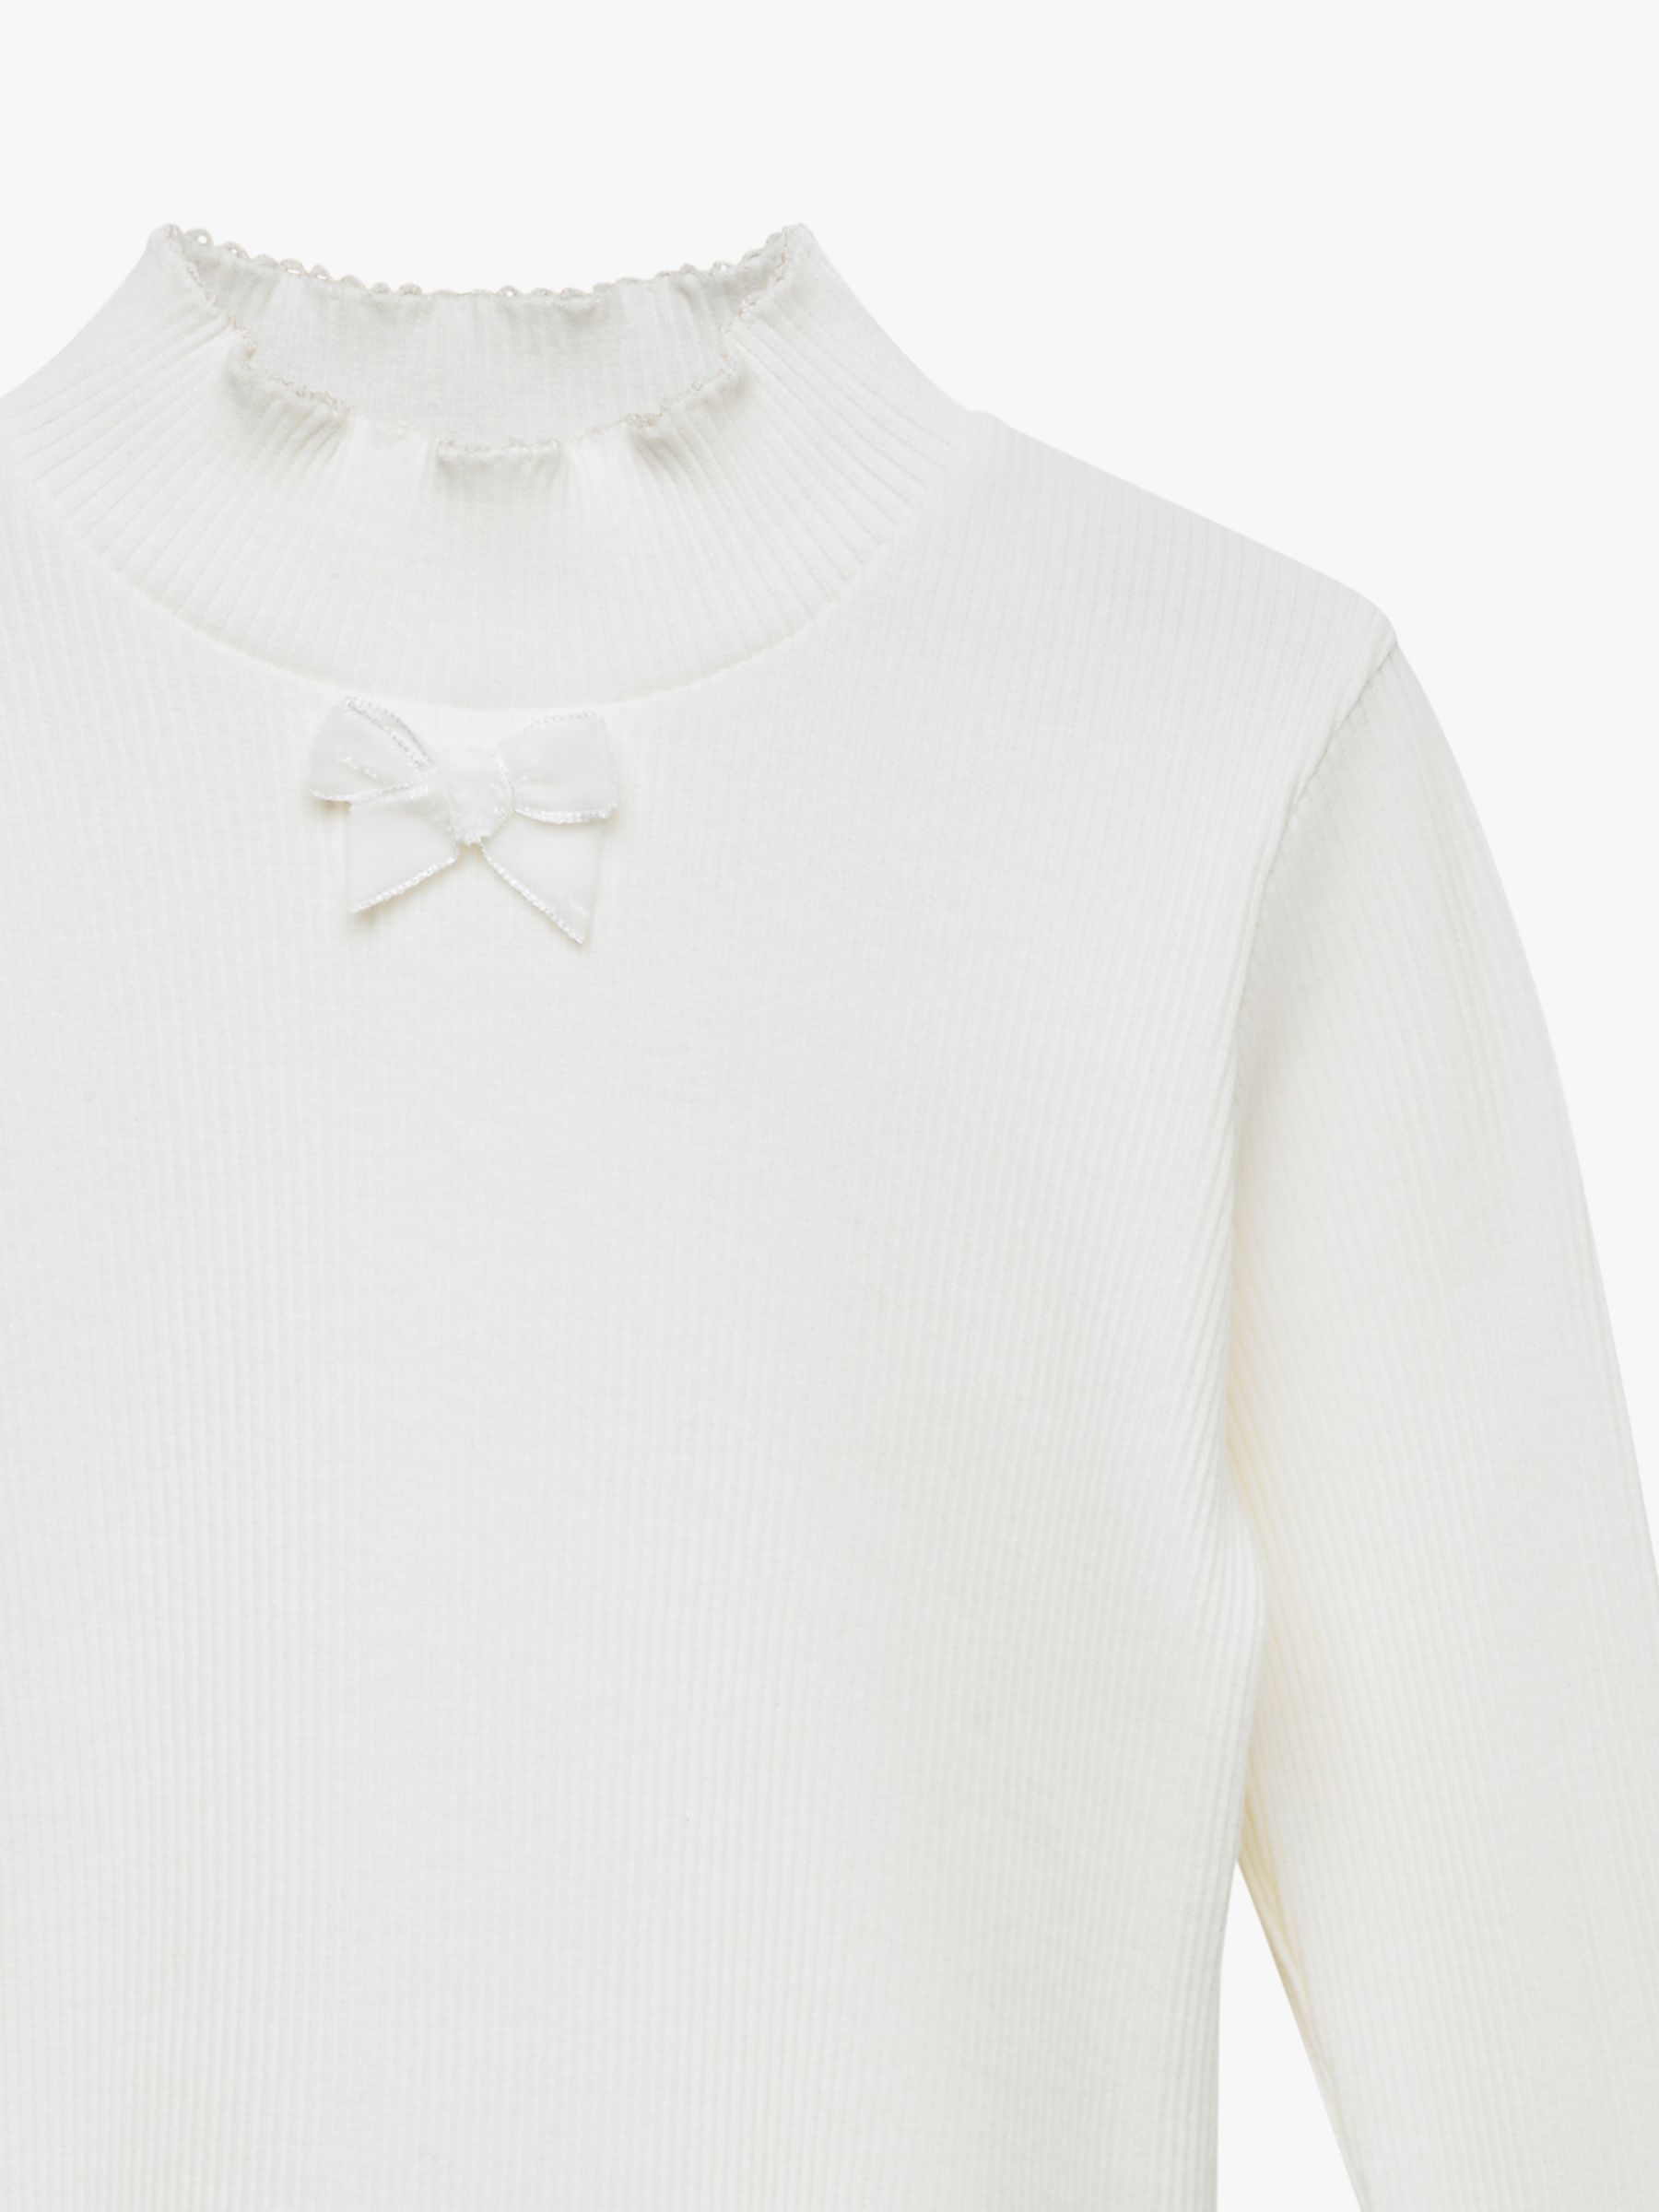 Trotters Kids' Grace Bow Detail Jersey Top, White at John Lewis & Partners